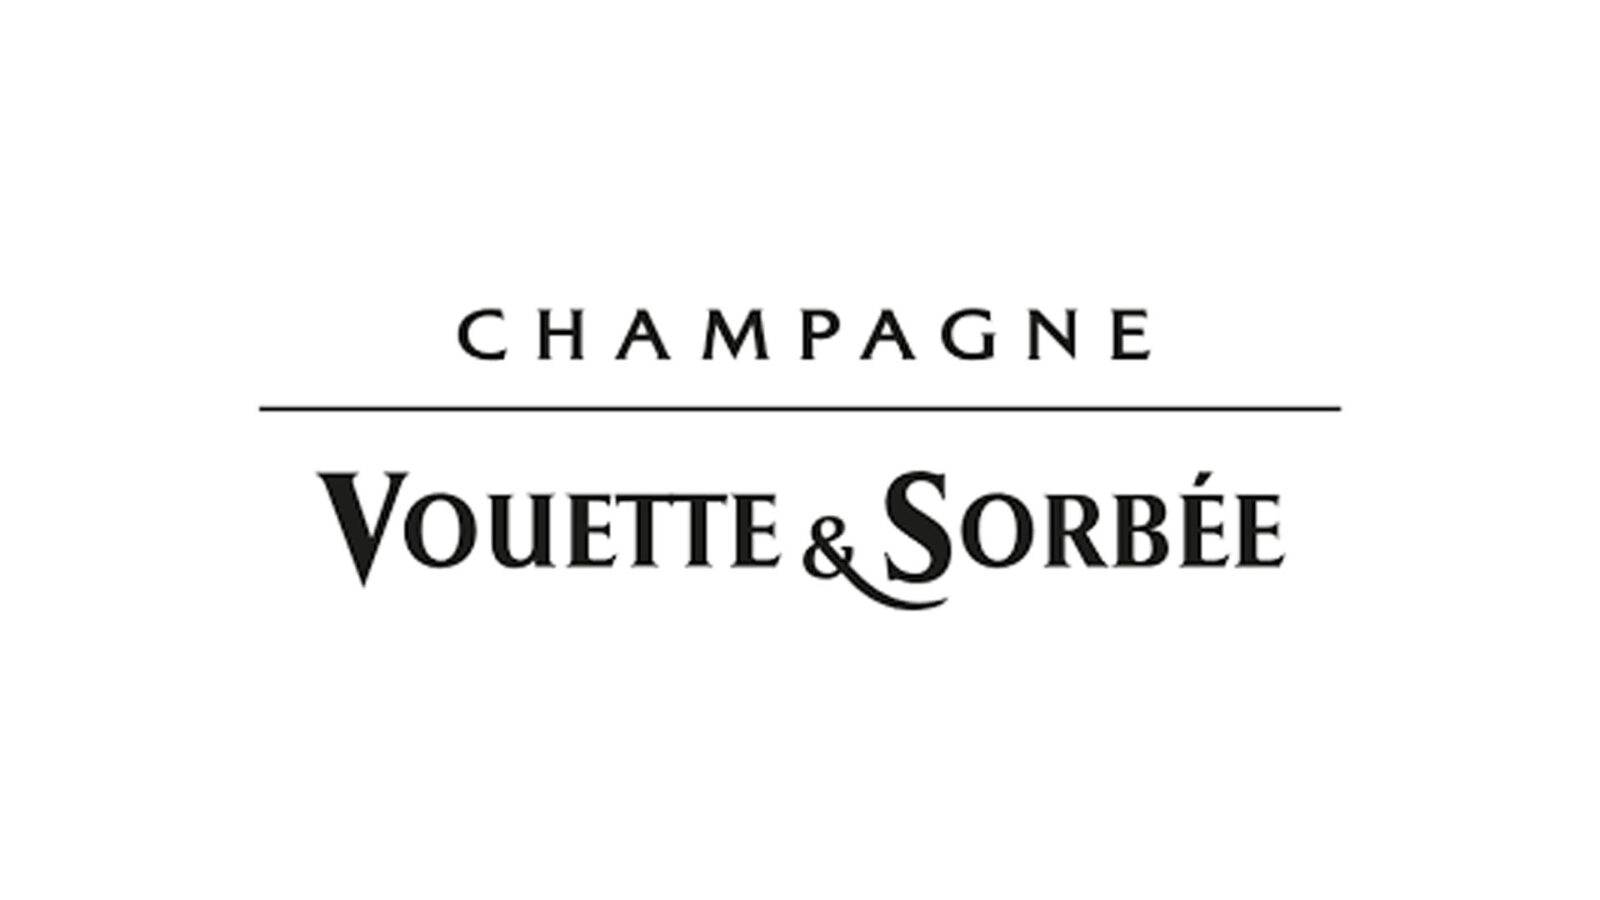 Champagne VOUETTE & SORBEE